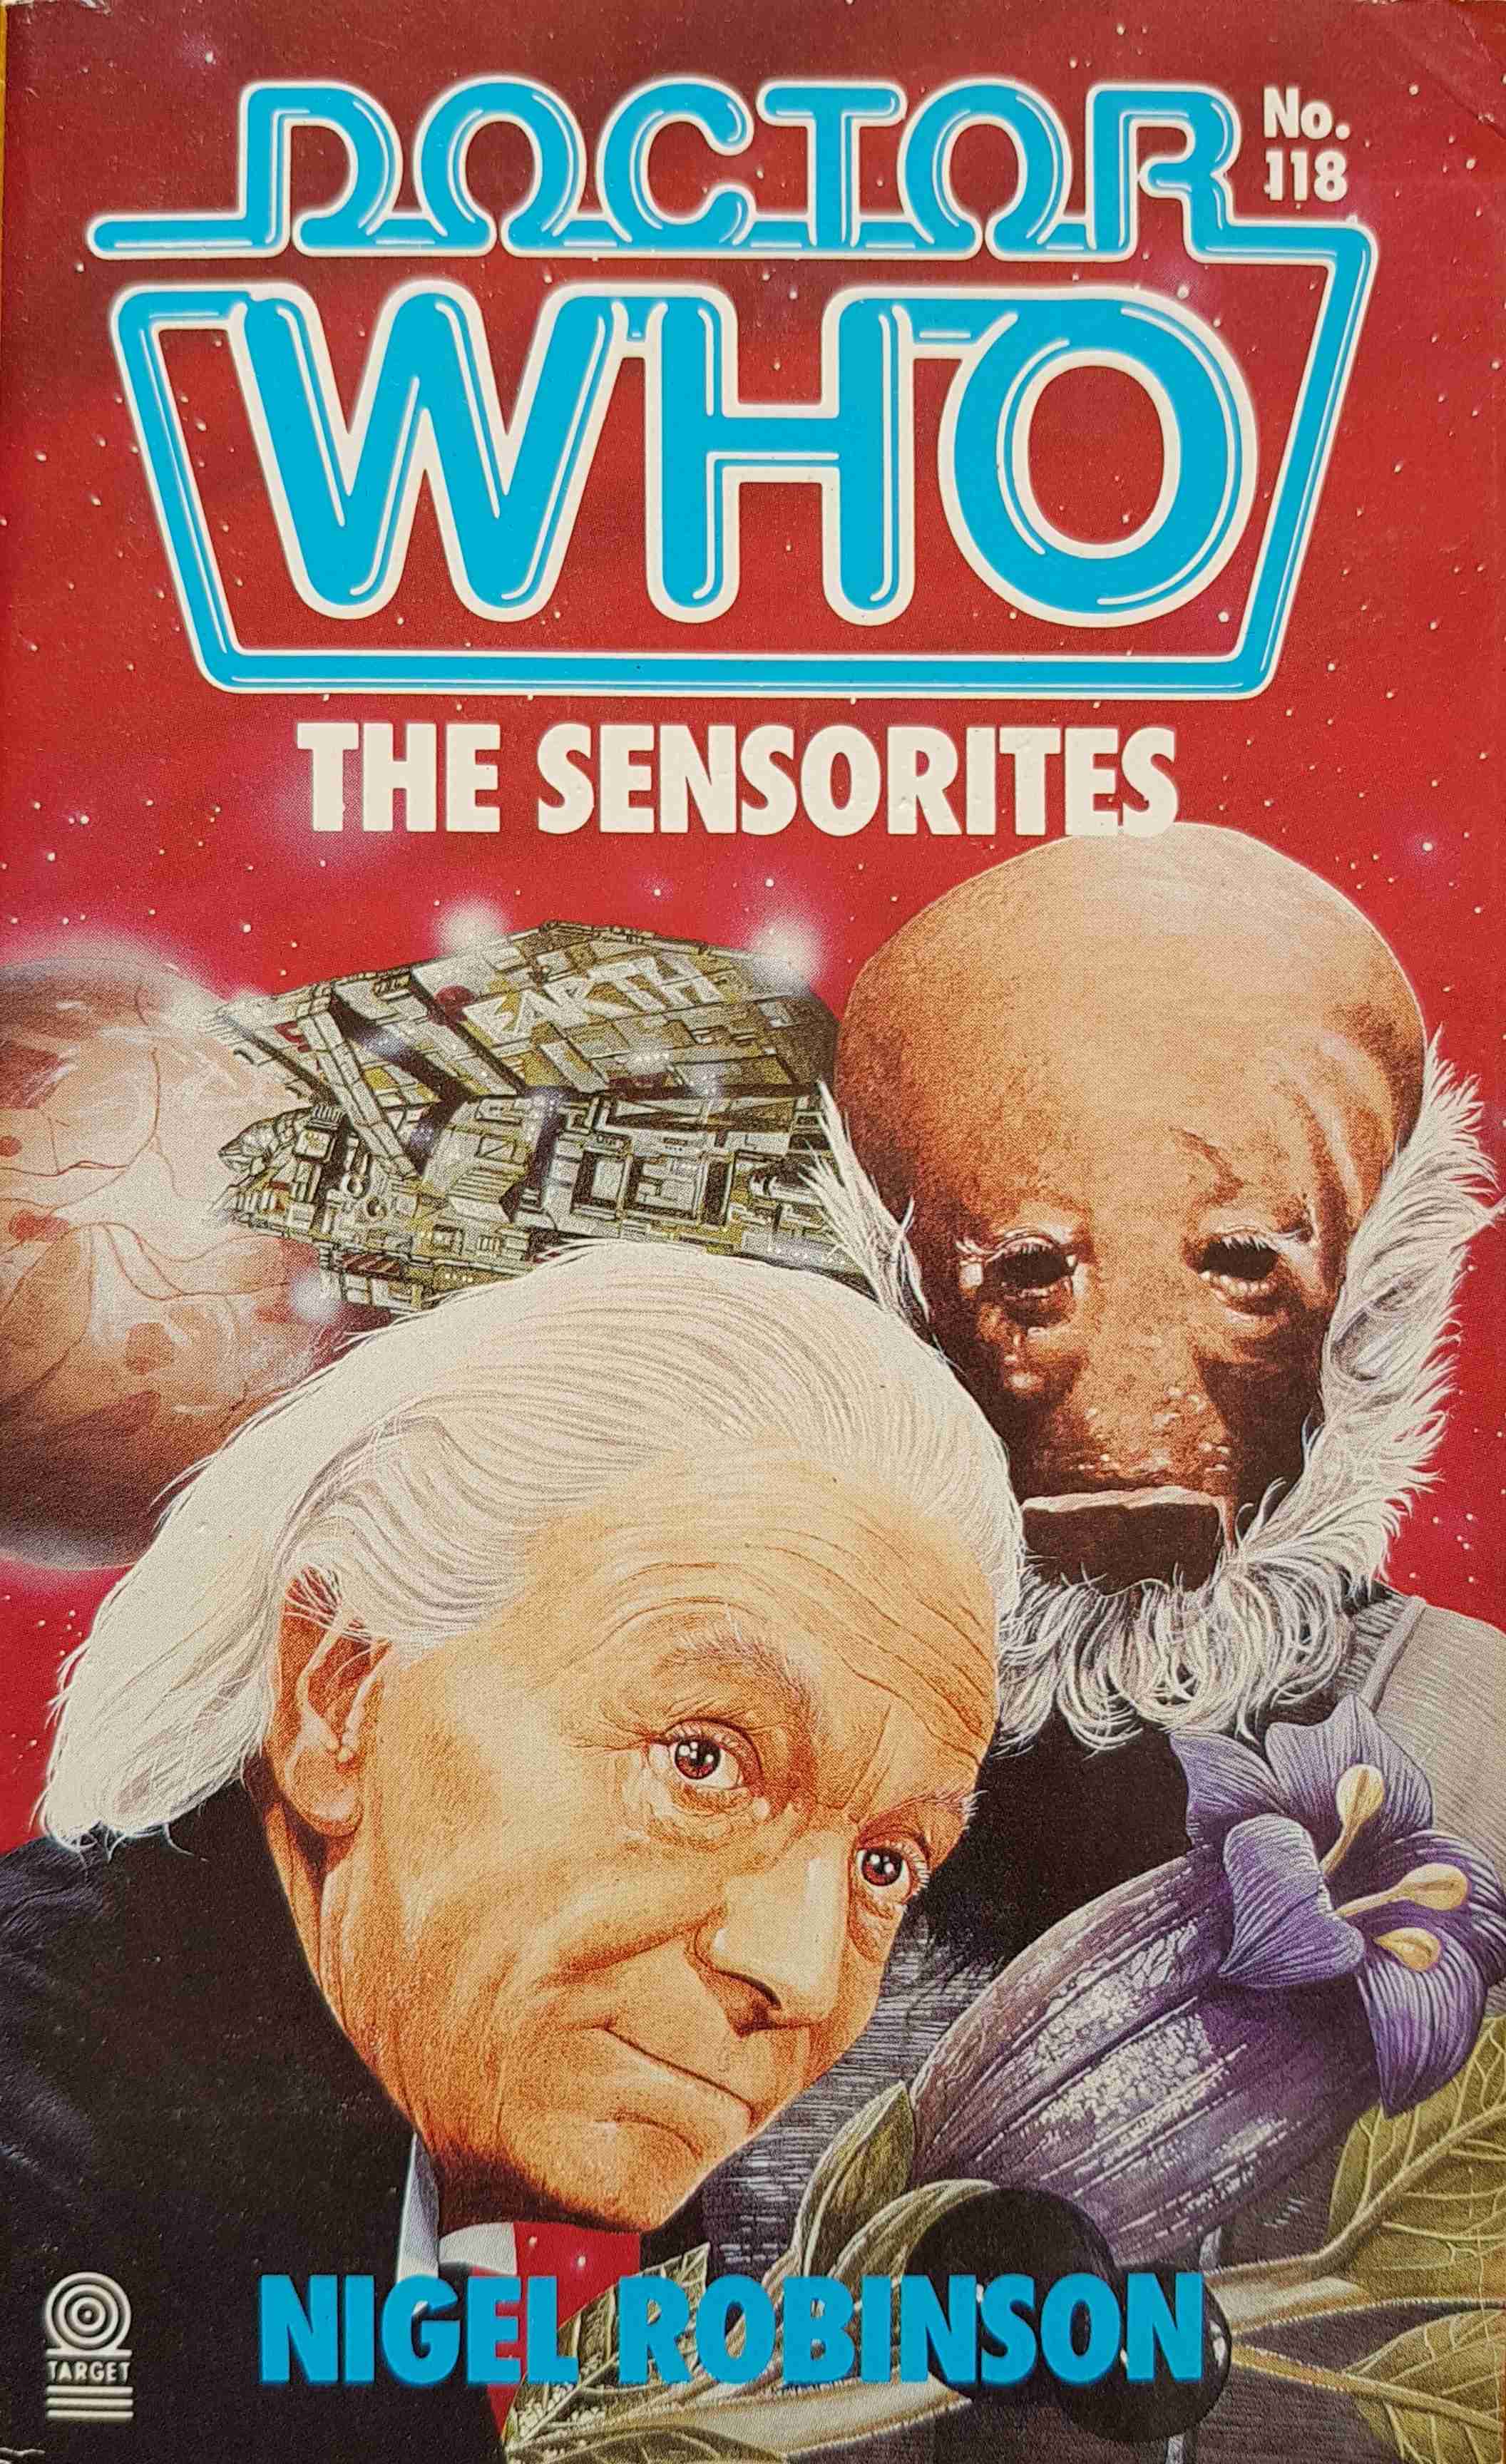 Picture of 0-426-20295-3 Doctor Who - The sensorites by artist Nigel Robinson from the BBC records and Tapes library